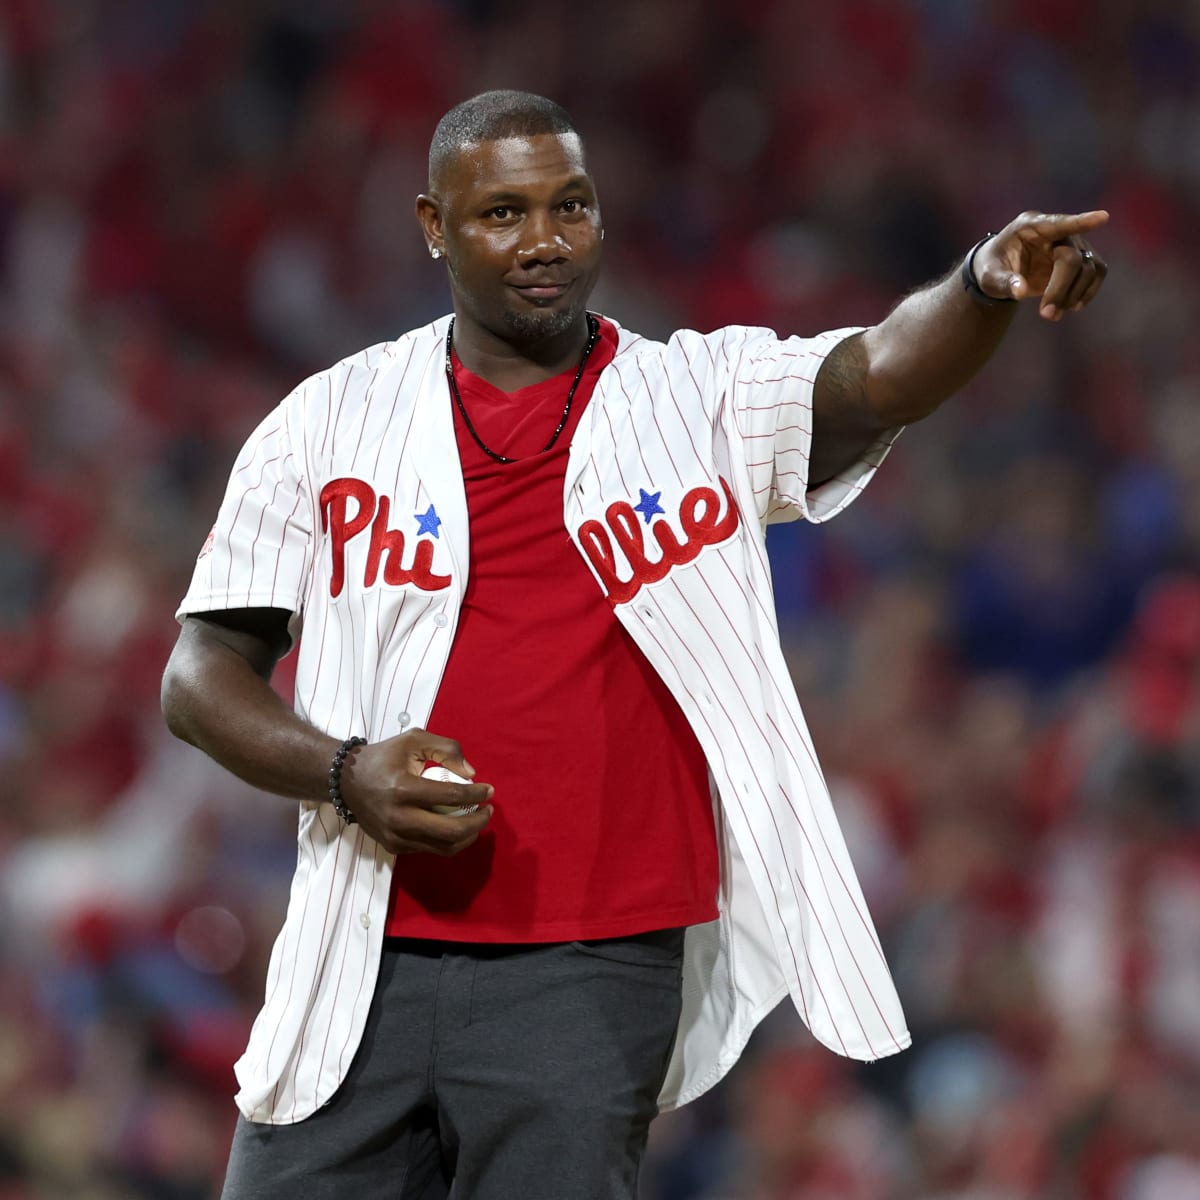 As the Philadelphia Phillies on Sunday honored their 1980 World